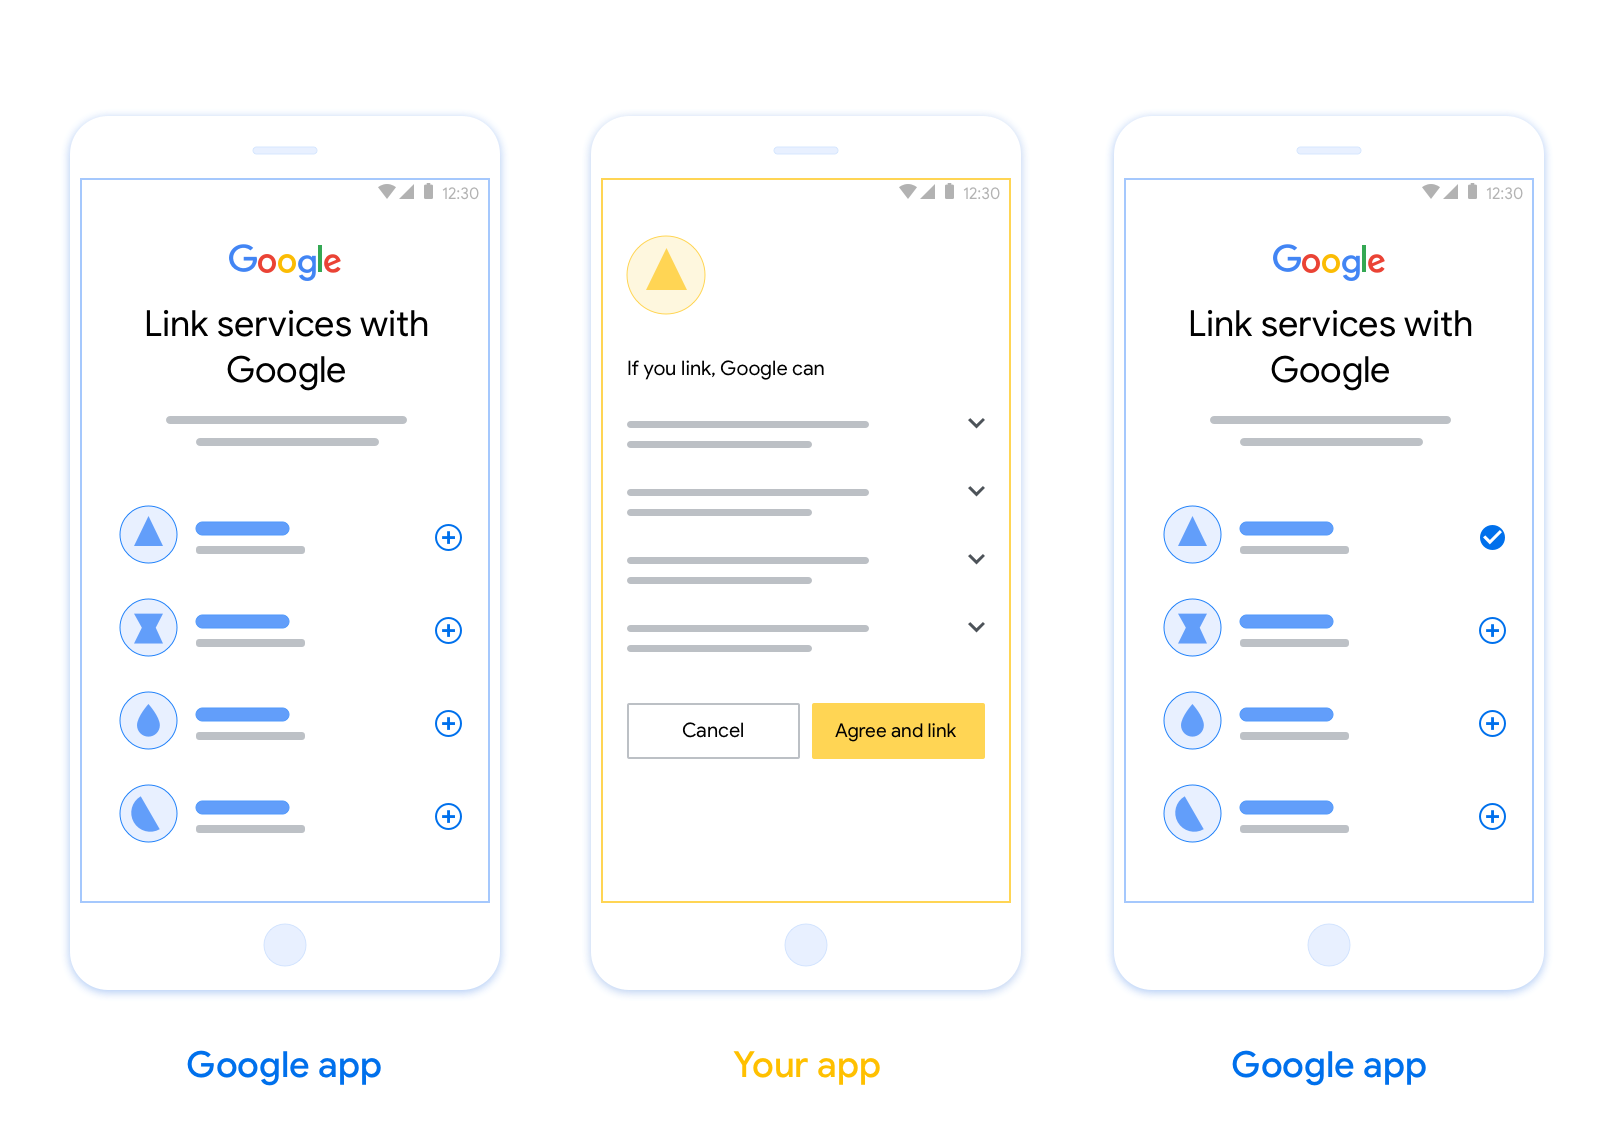 This figure shows the steps for a user to link their Google account
            to your authentication system. The first screenshot shows how a user
            can select your app if their Google account is linked to your app.
            The second screenshot shows the confirmation for linking their
            Google account with your app. The third screenshot shows a
            successfully linked user account in the Google app.